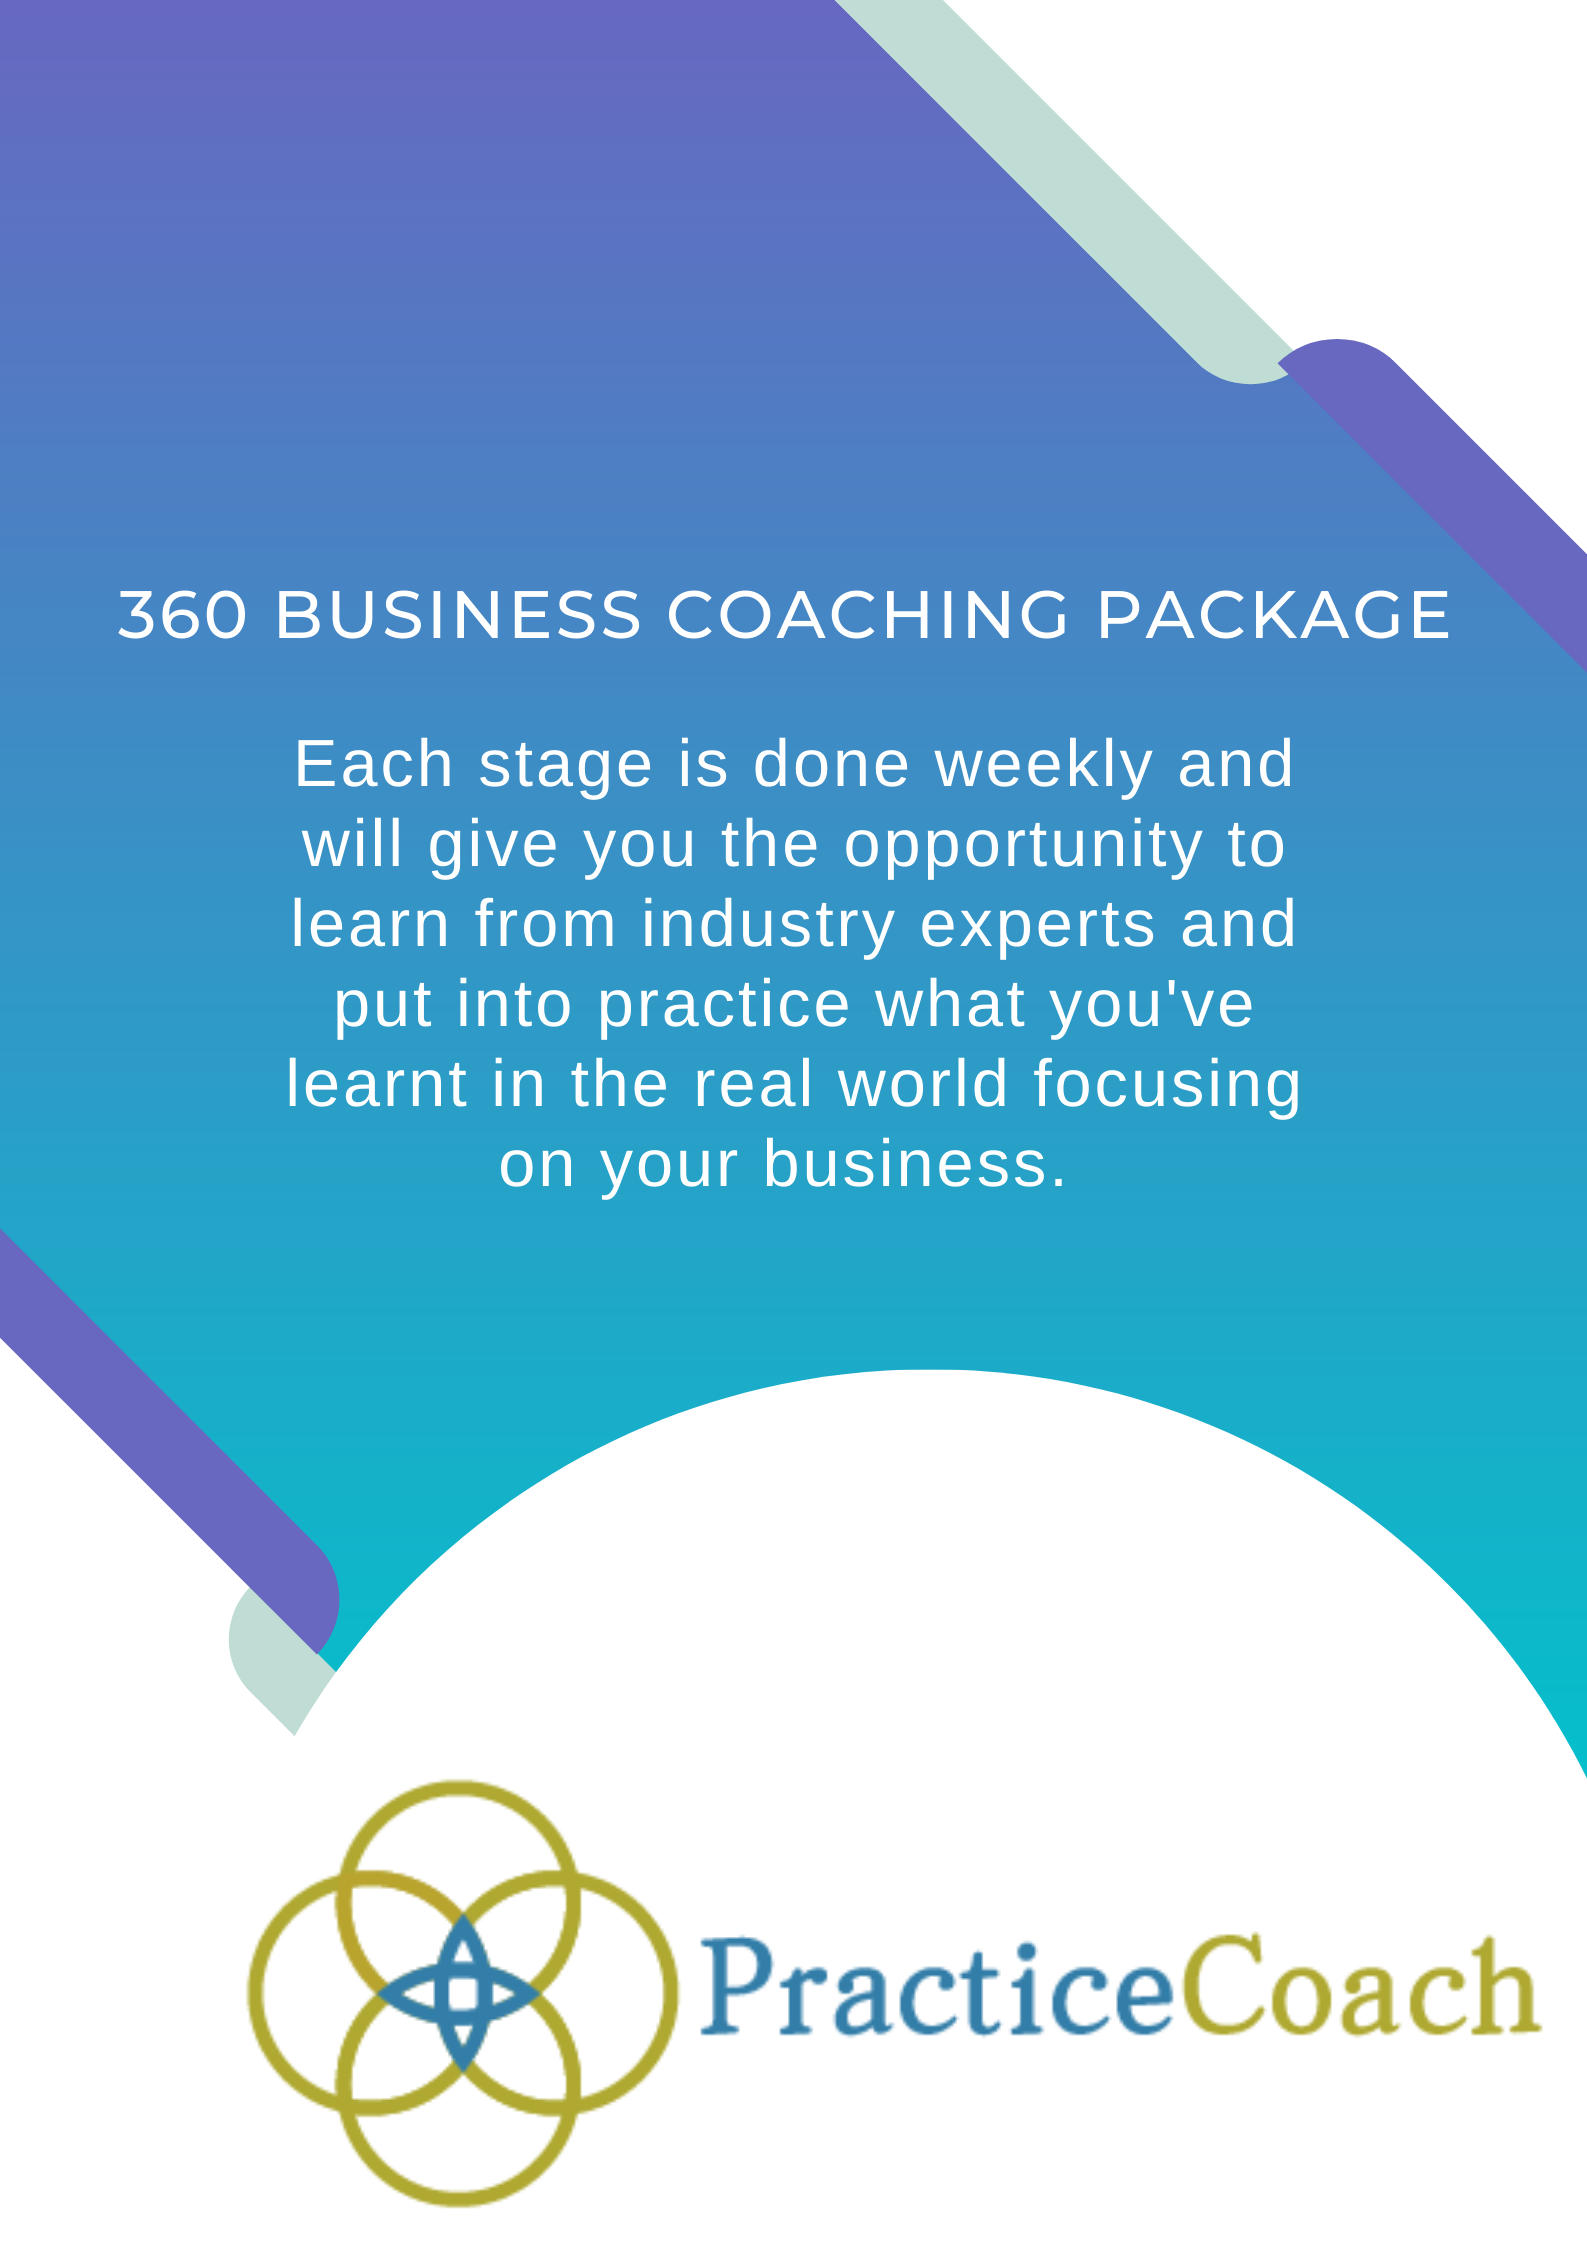 360 Business Coaching Package - Practice Coach Clinic